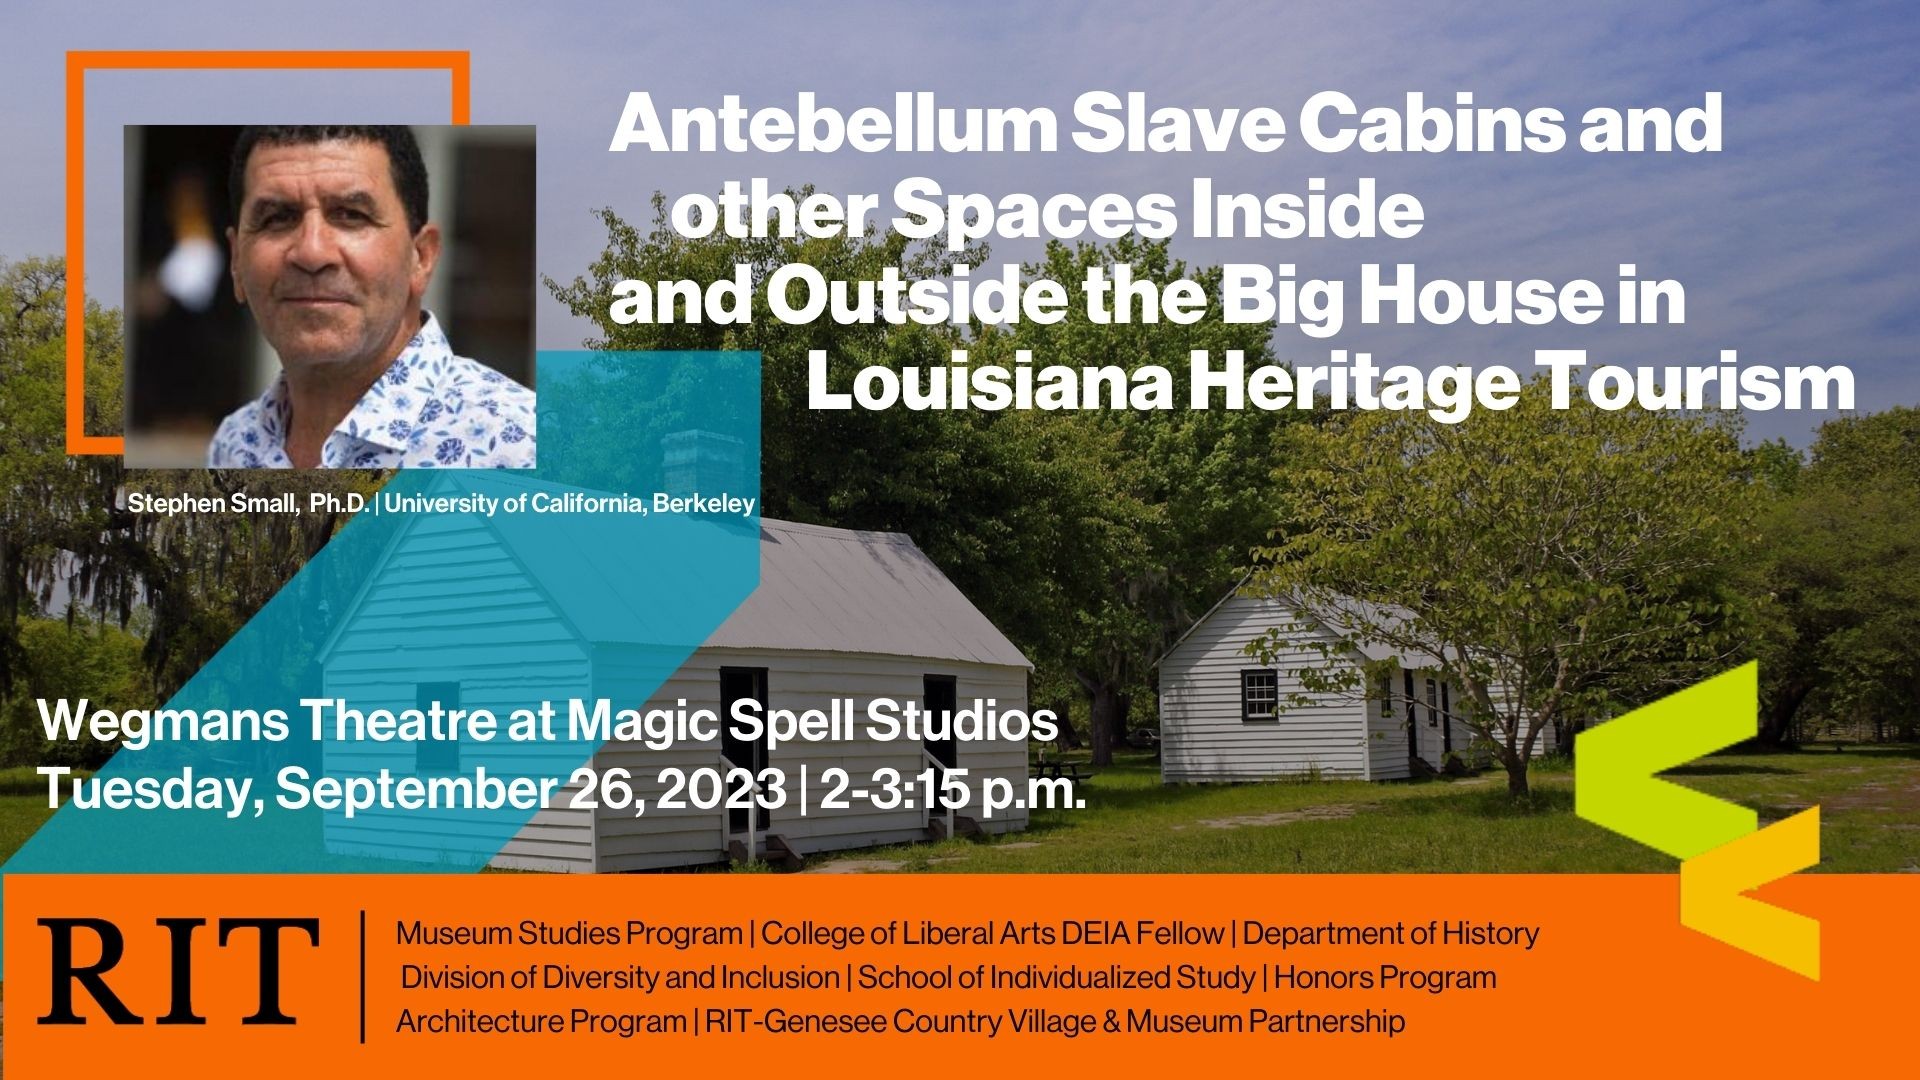 Cabin image in background, photo of speaker and text about the event